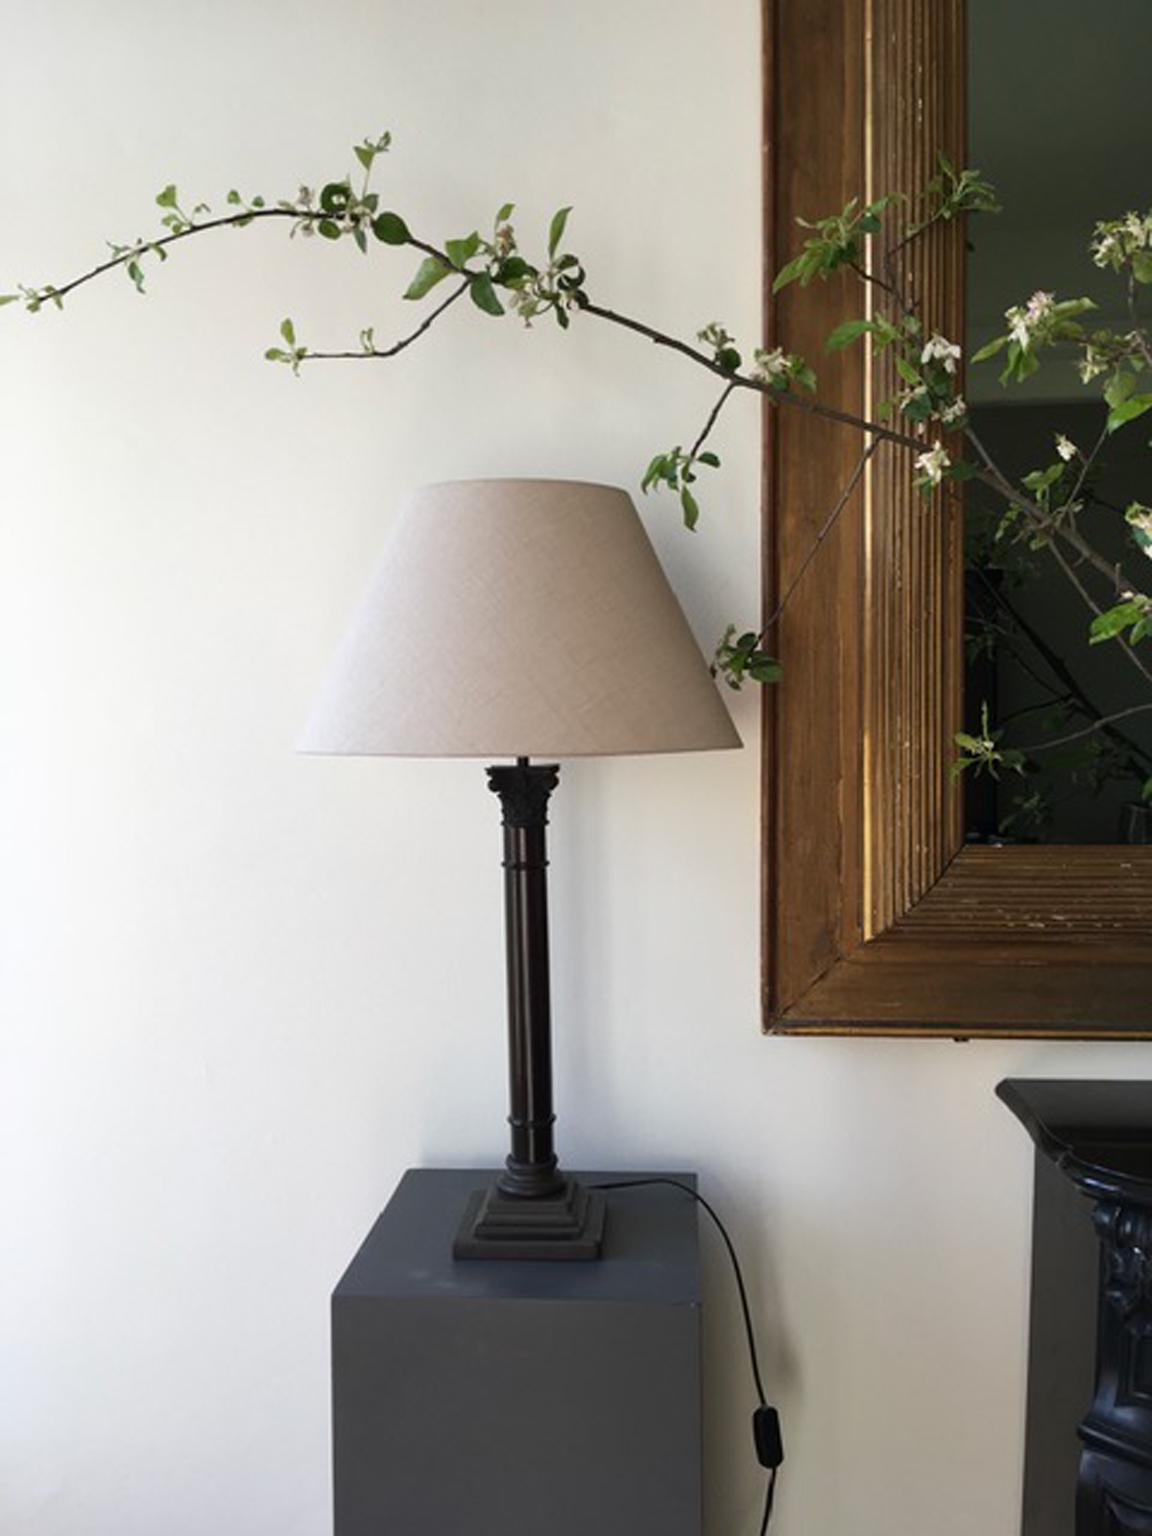 This elegant table lamp is an Italian contemporary production.
The column in wood has is in ebony color, the hand made lampshade is in natural color fabric.
On the top and on the foot there are bronze cast details.

EU wiring
USA GB wiring on